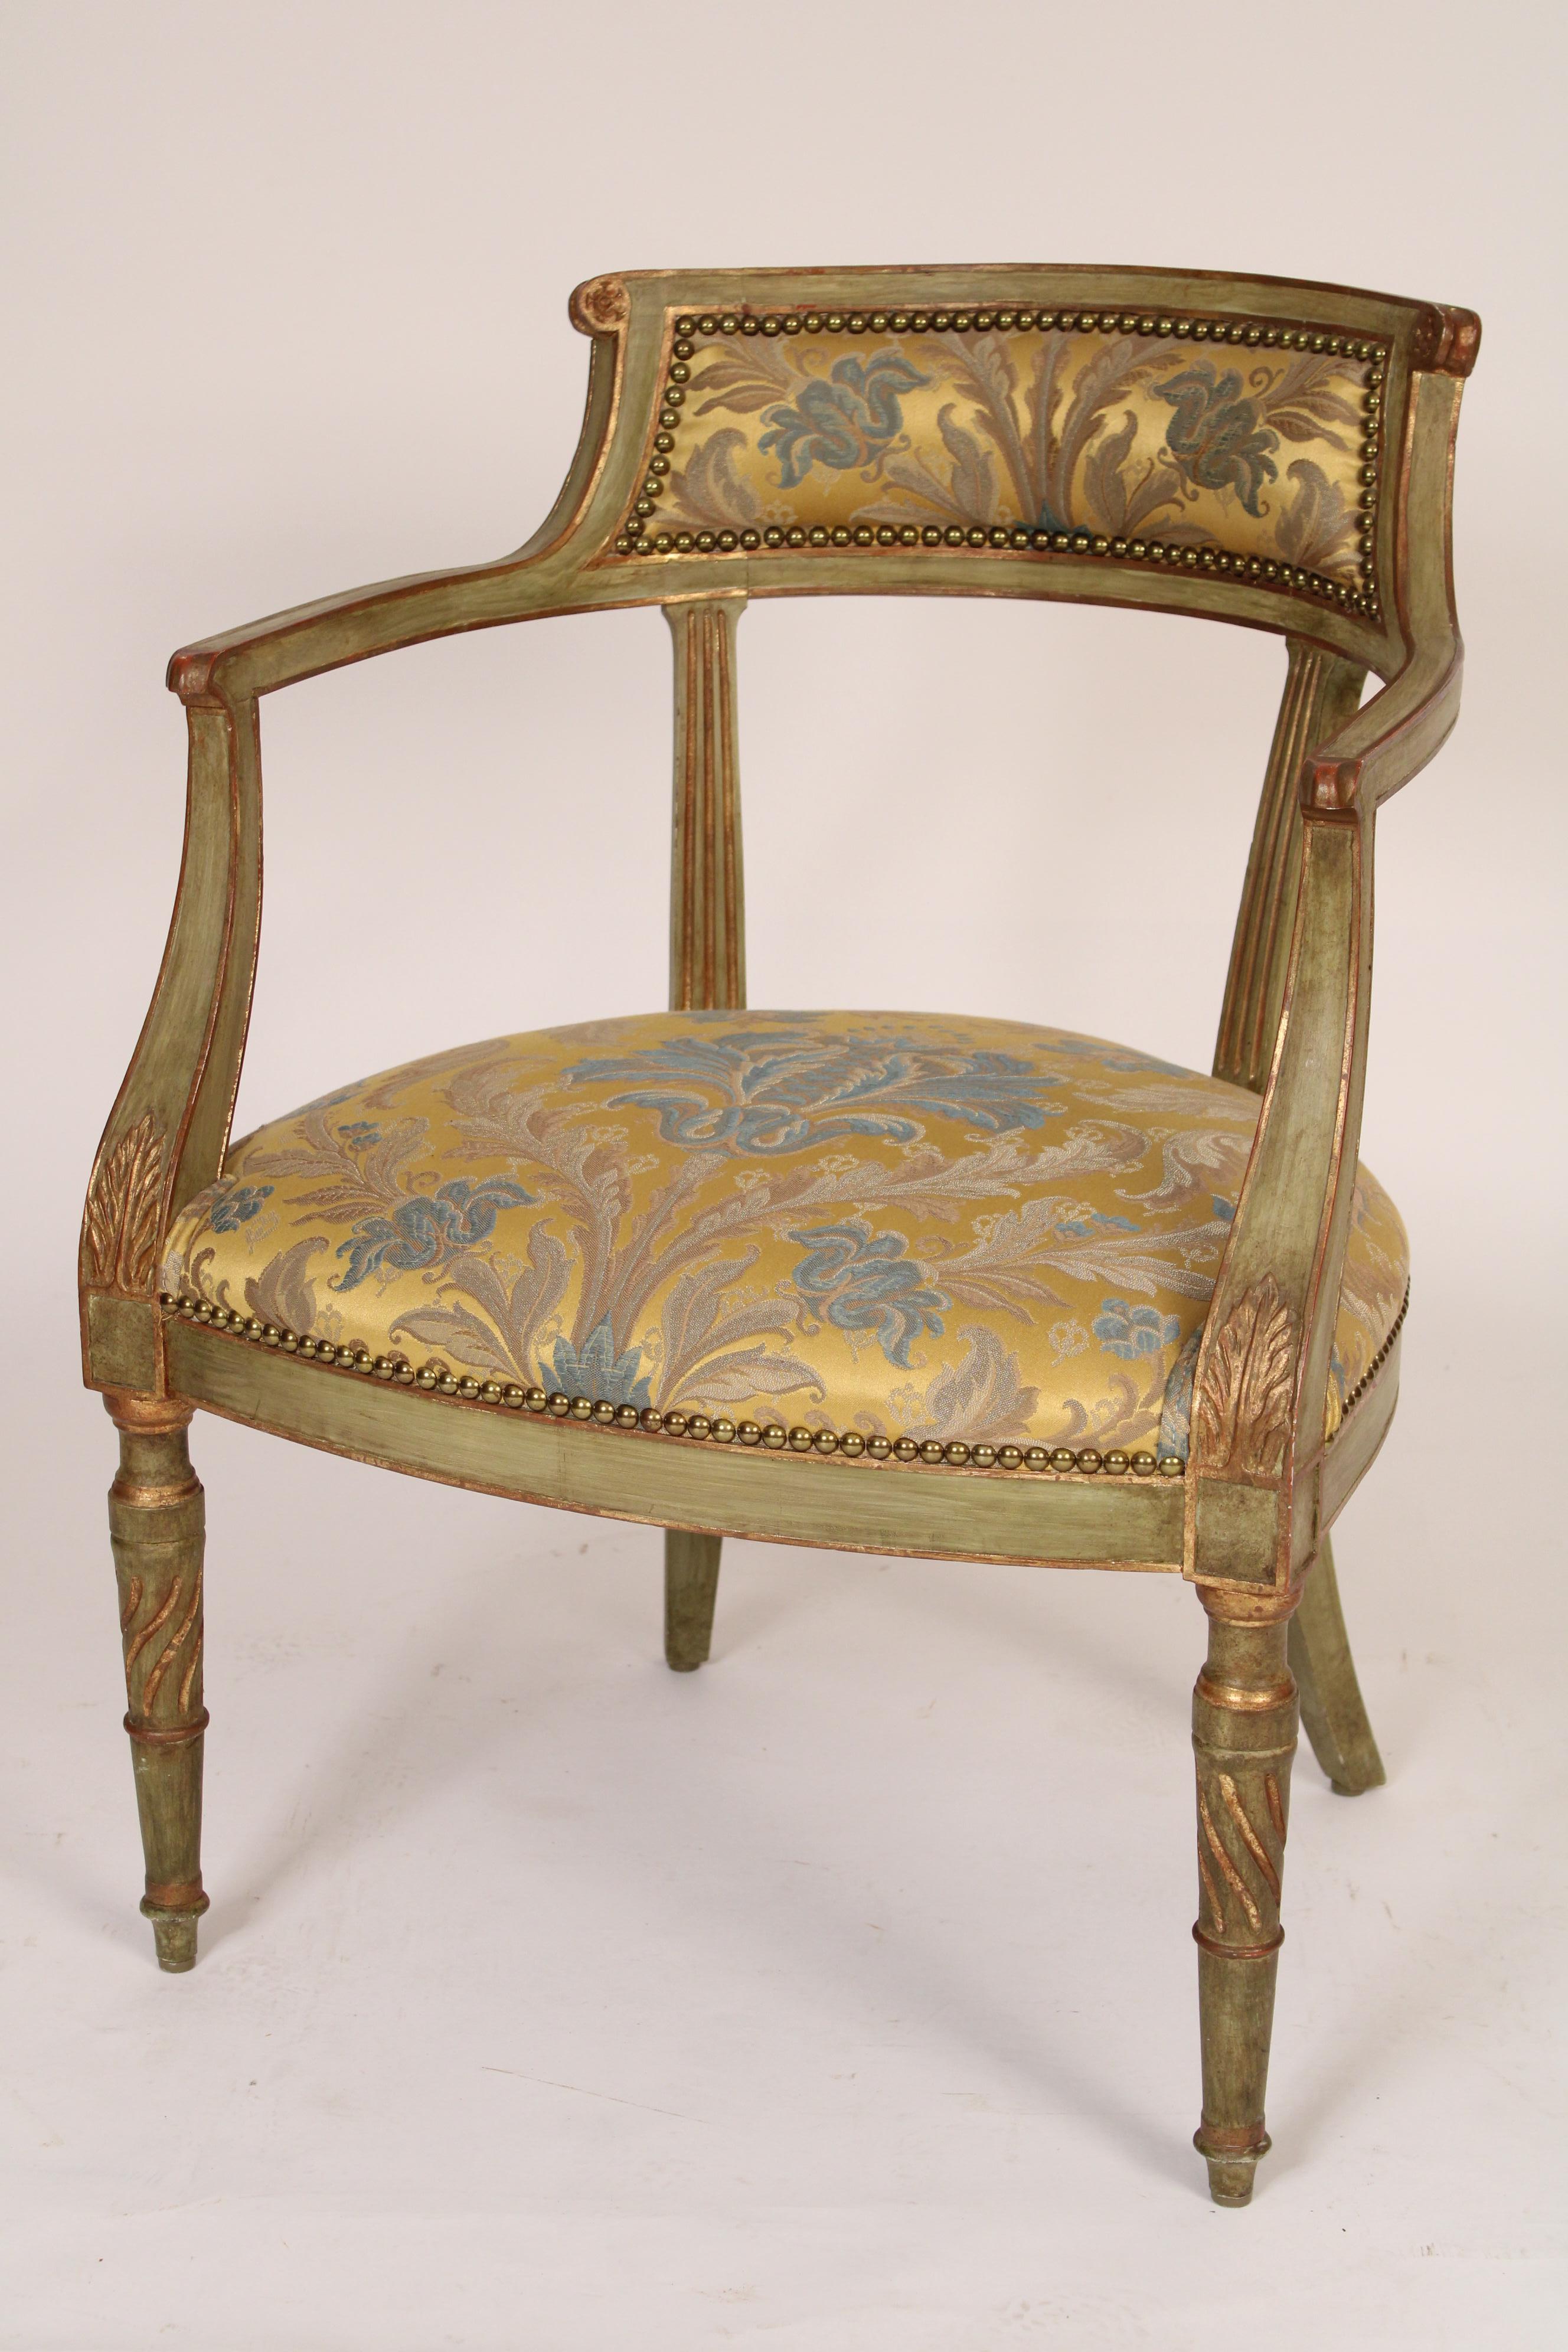 Pair of neo classical style painted and gilt decorated barrel back armchairs, late 20th century. With brass nail head upholstered backs, arms with down swept arm supports ending in acanthus leaf carvings and spiral turned tapered front legs. Deepest